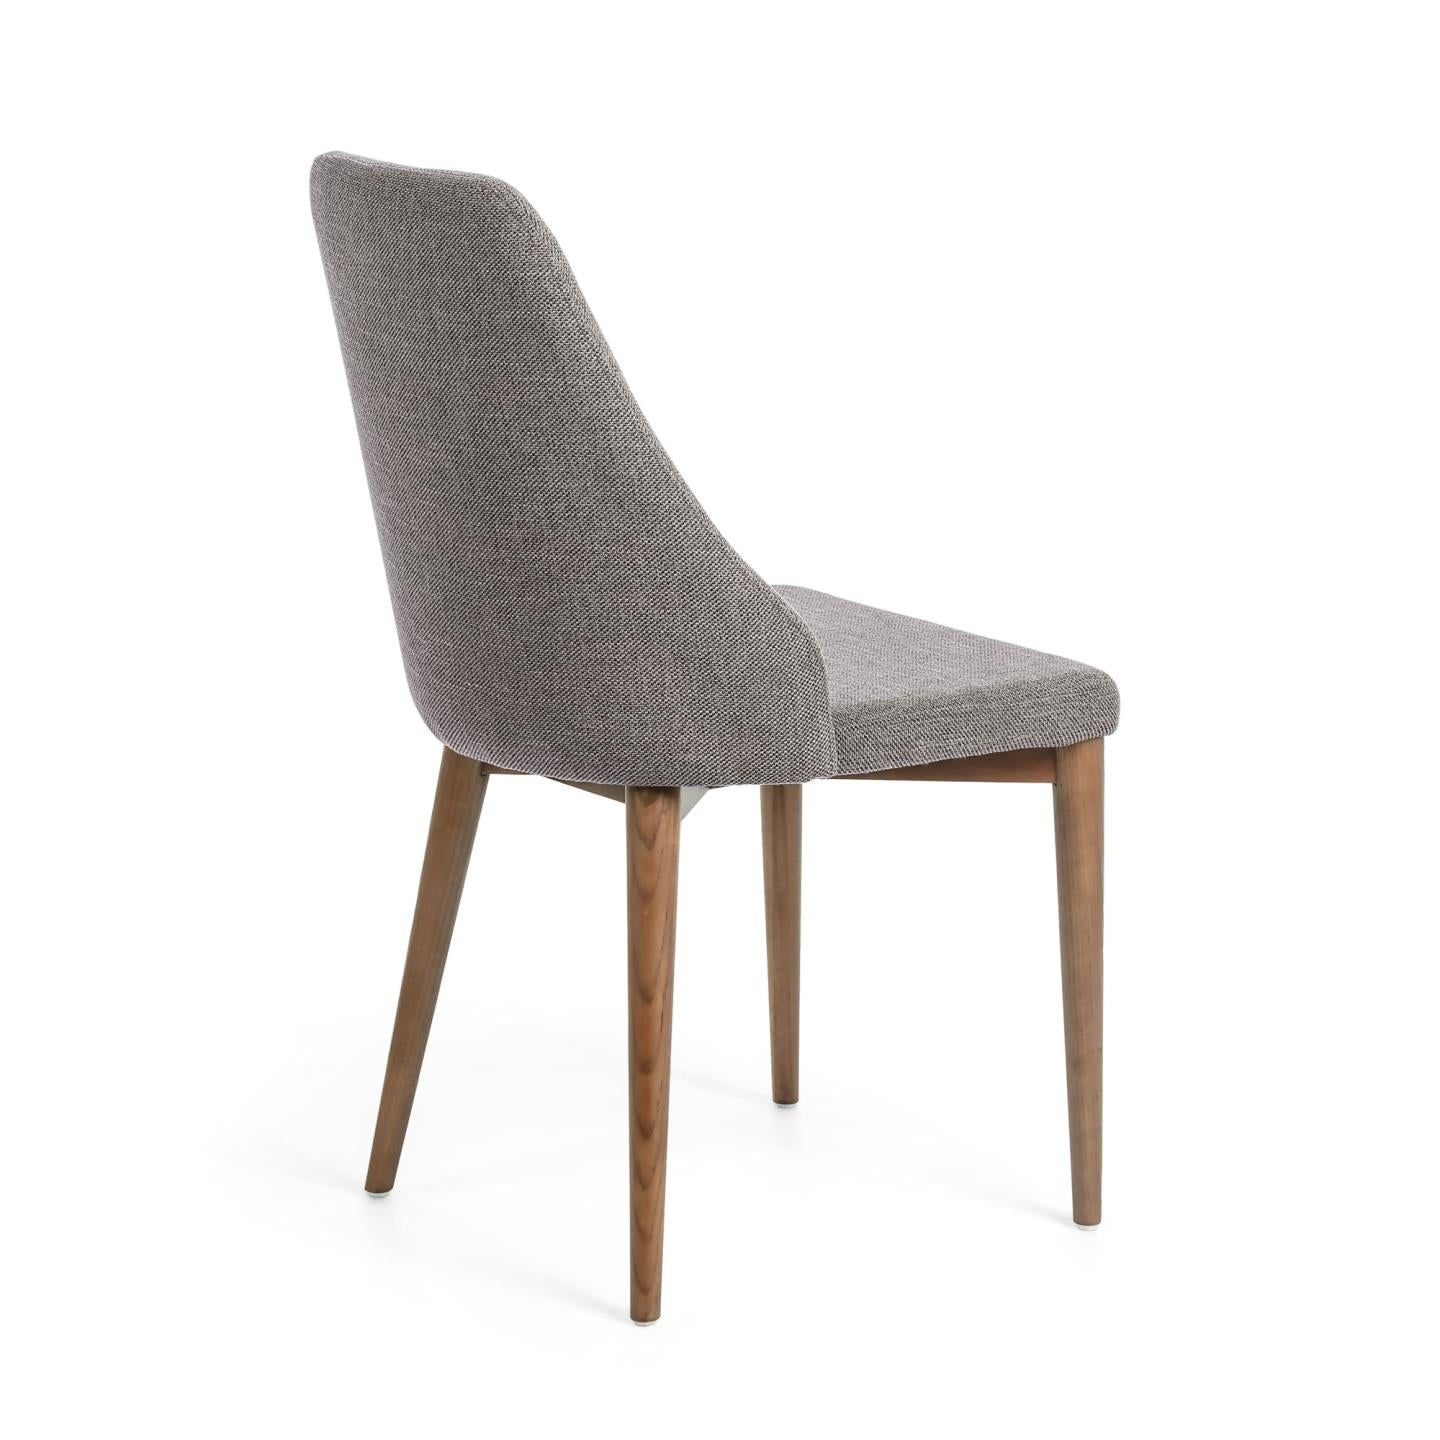 Rosie light grey chair with solid ash legs with dark finish